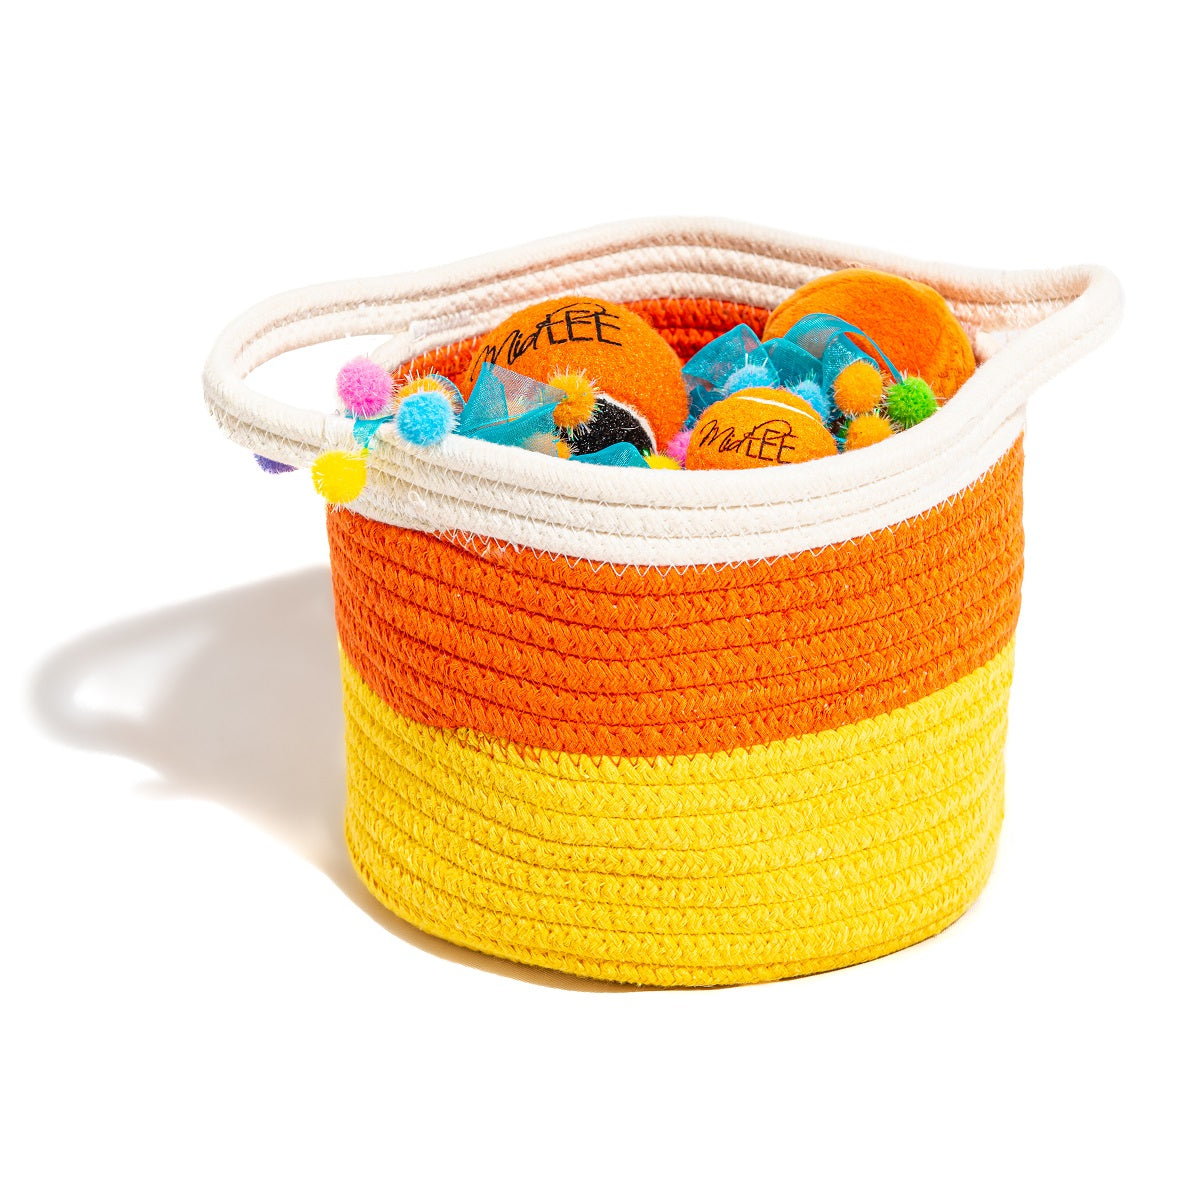 Midlee Candy Corn Rope Basket